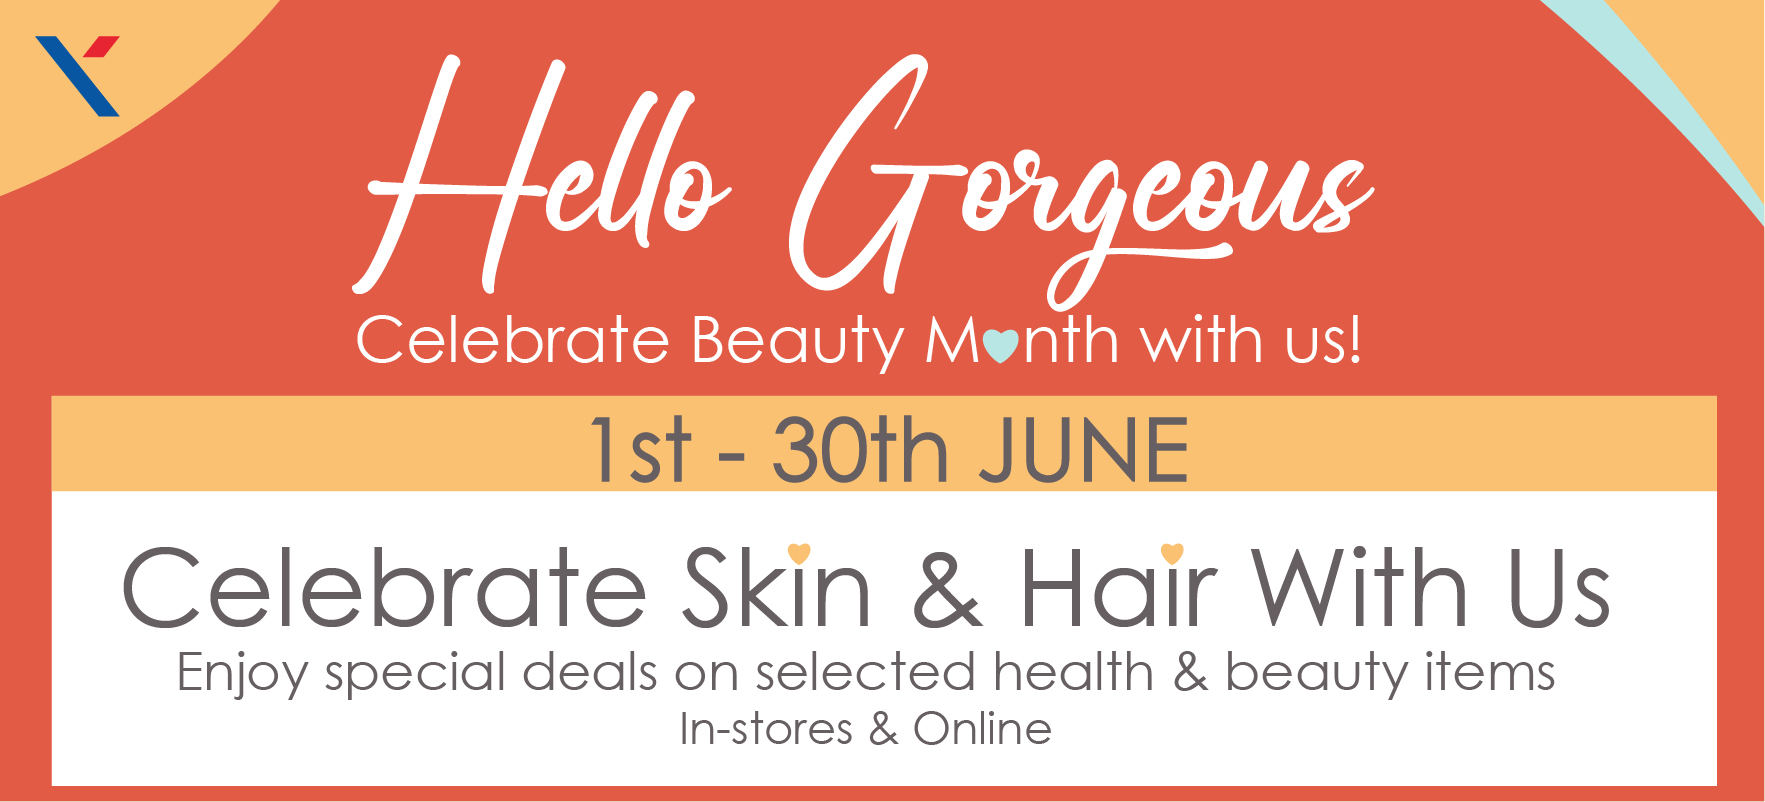 Celebrate Skin & Hair with us